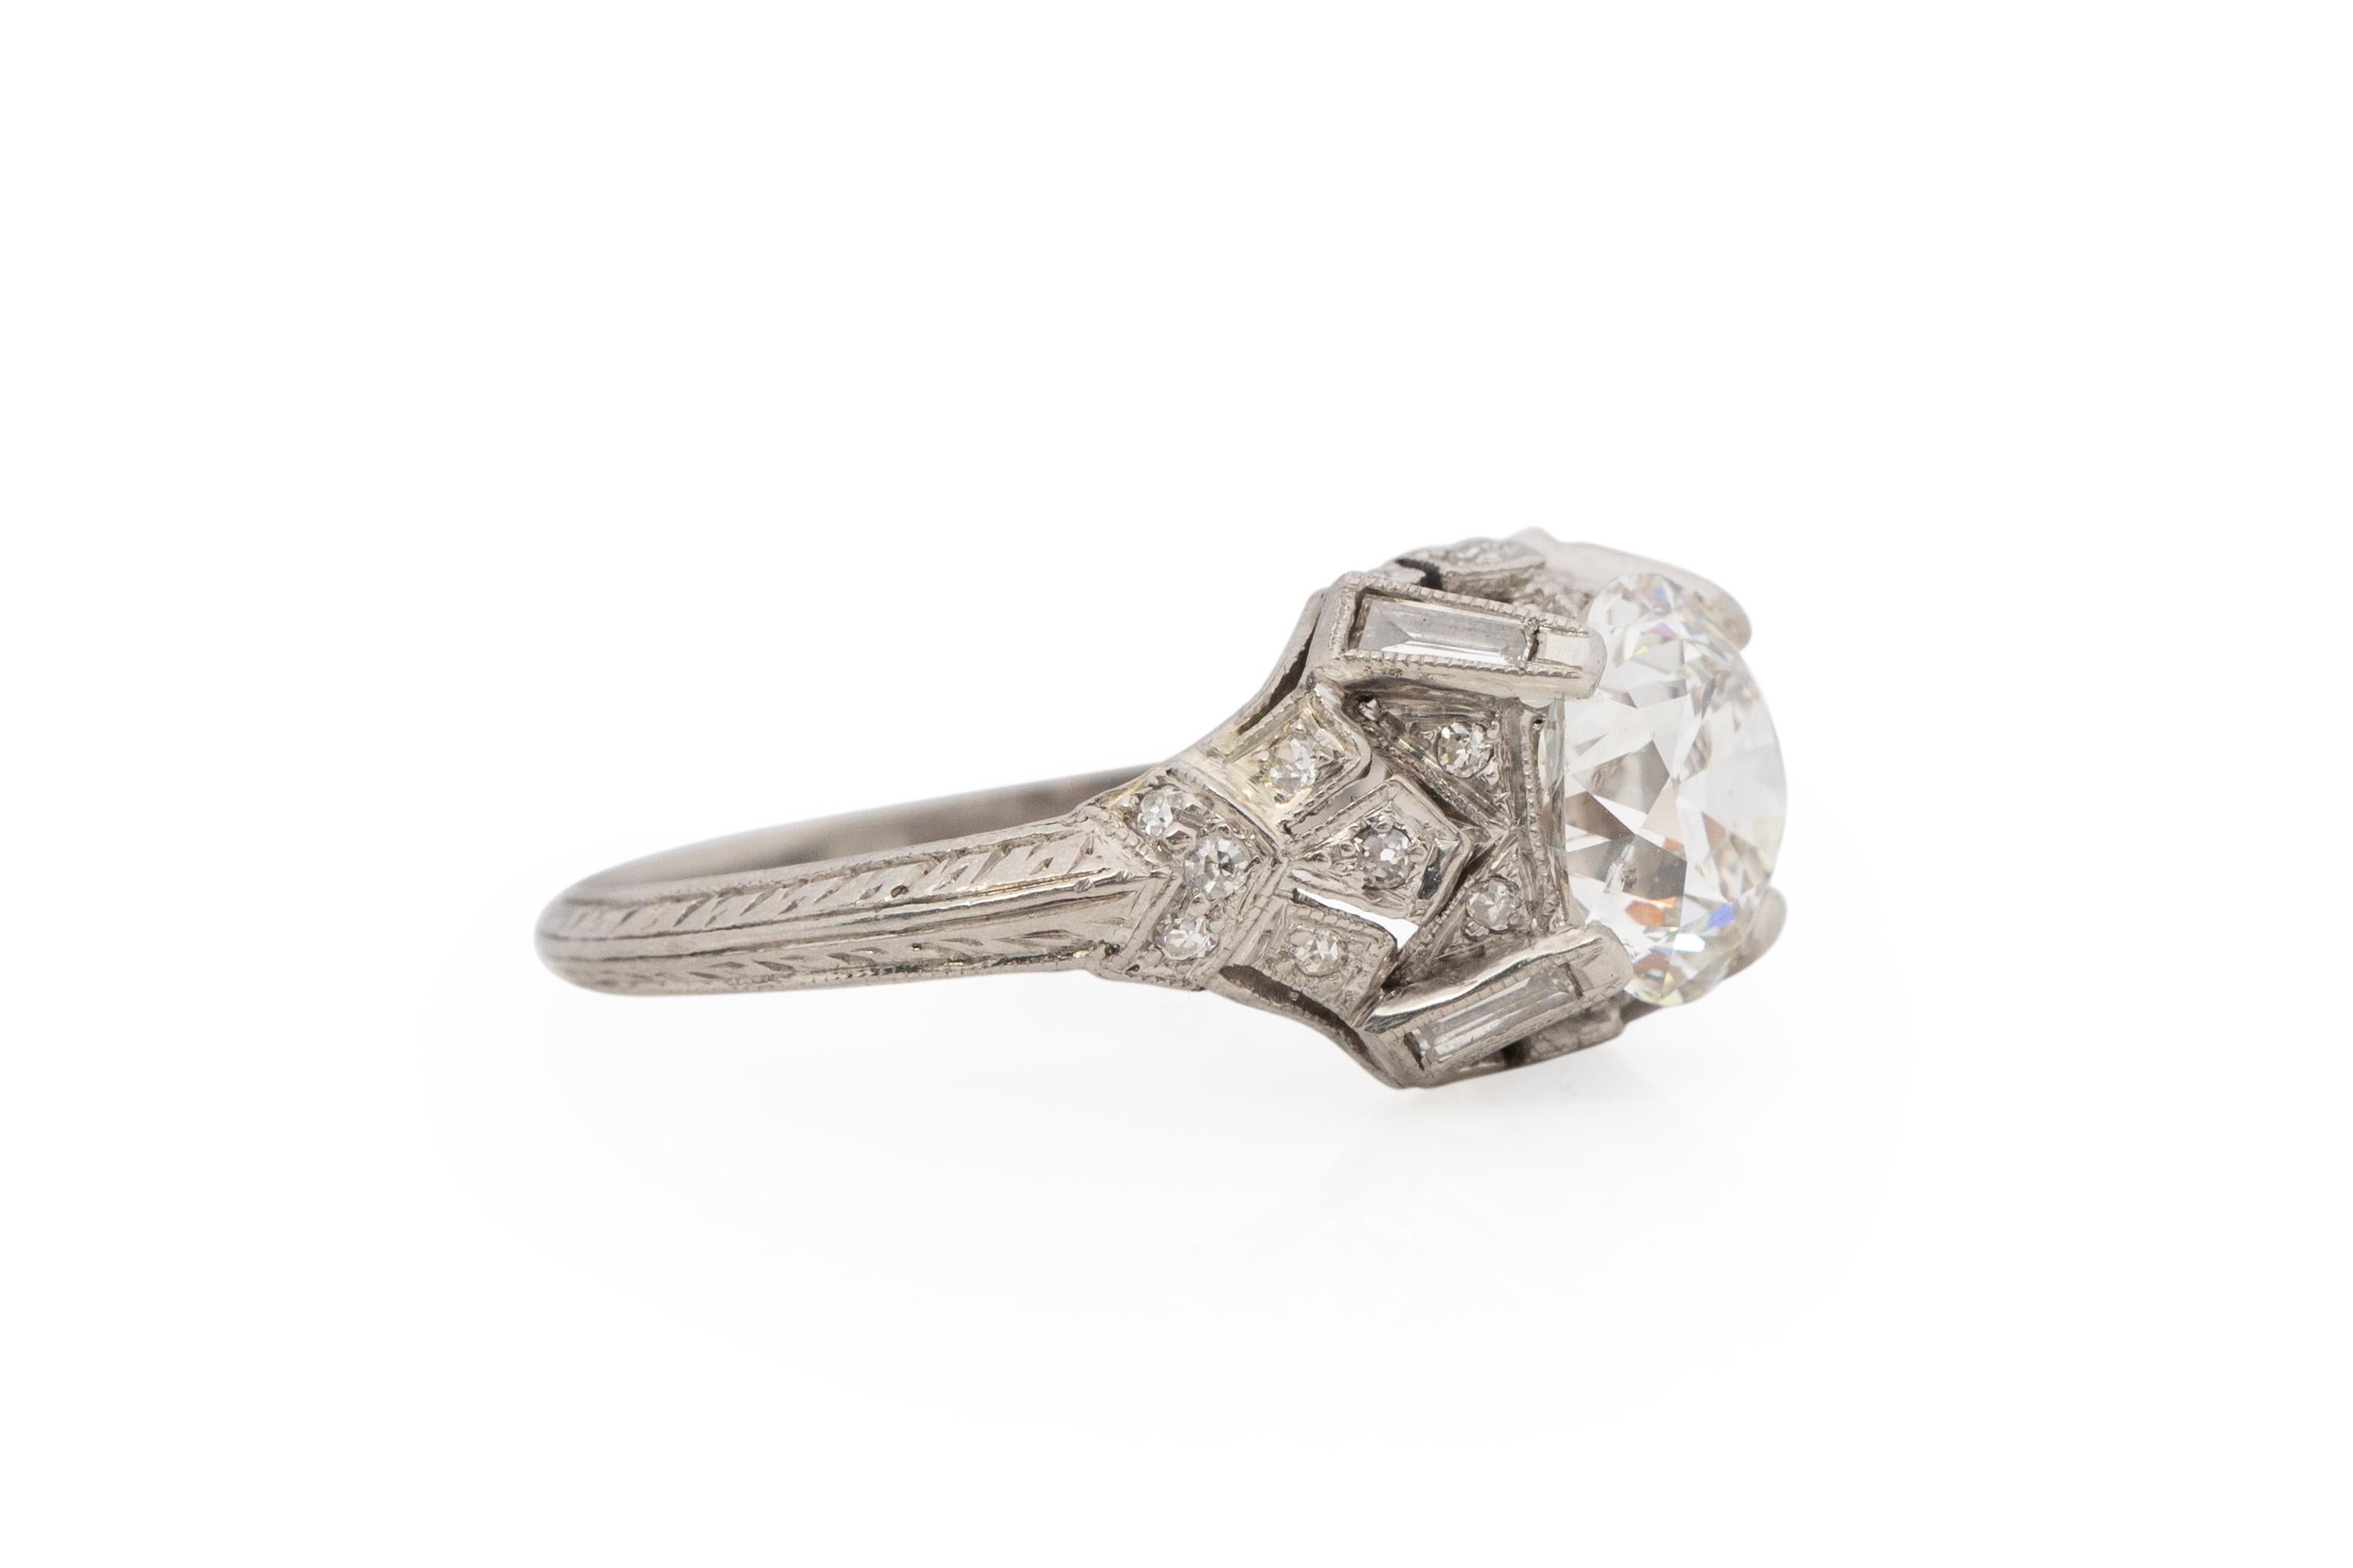 Ring Size: 6.75
Metal Type: Platinum [Hallmarked, and Tested]
Weight: 3.5 grams

Center Diamond Details:
GIA REPORT #: 1216619261
Weight: 1.81 carat 
Cut: Old European brilliant
Color: J
Clarity: SI2
Measurements: 7.90mm x 7.61mm x 4.79mm

Side